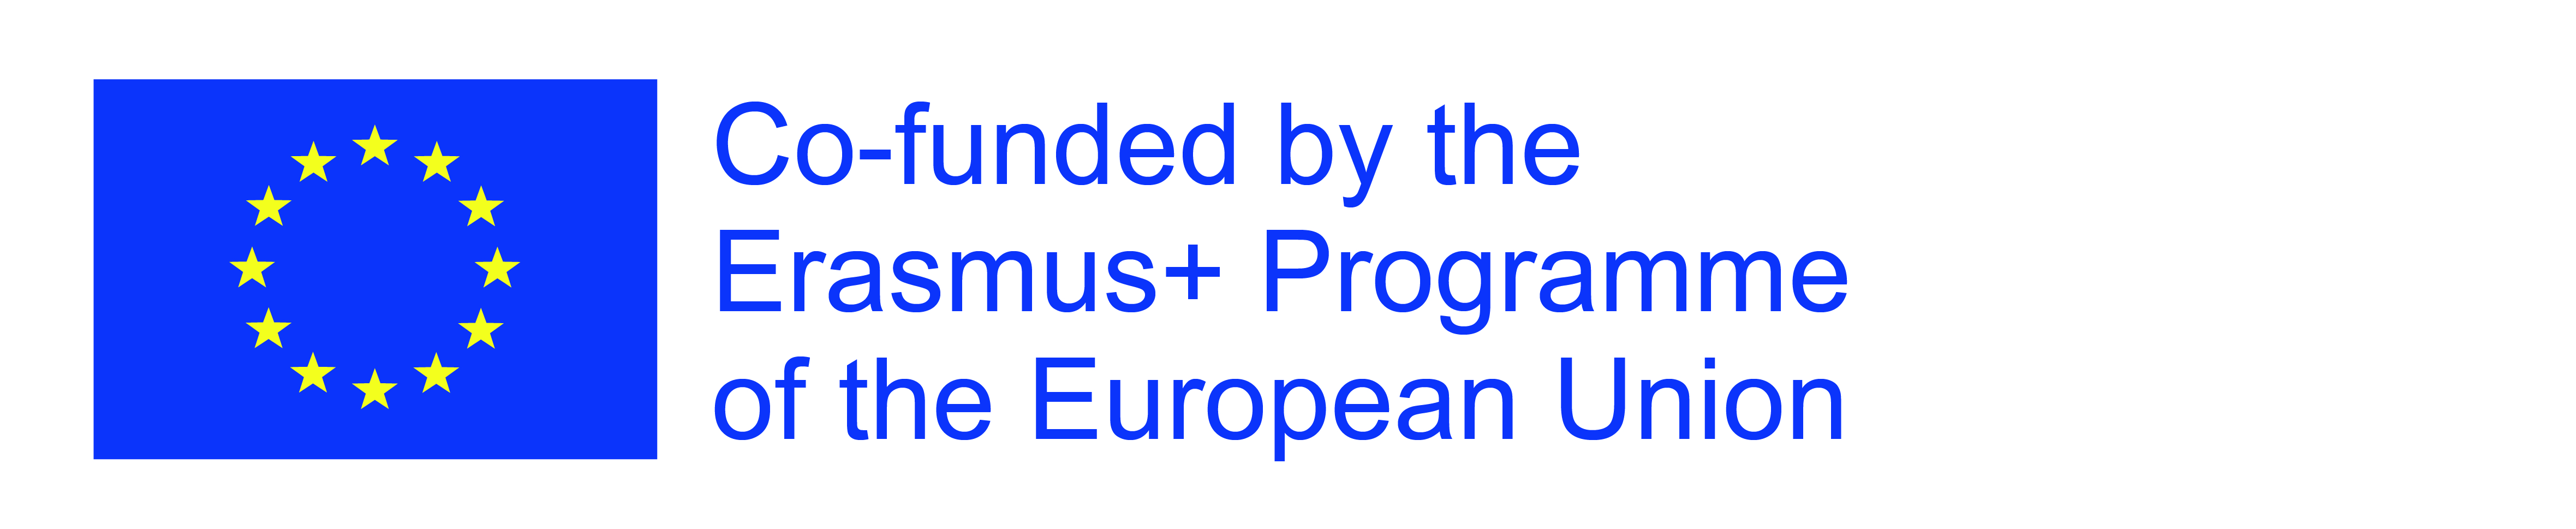 Co-funded by the Erasmus+ Programme of the European Union (tekst desno)